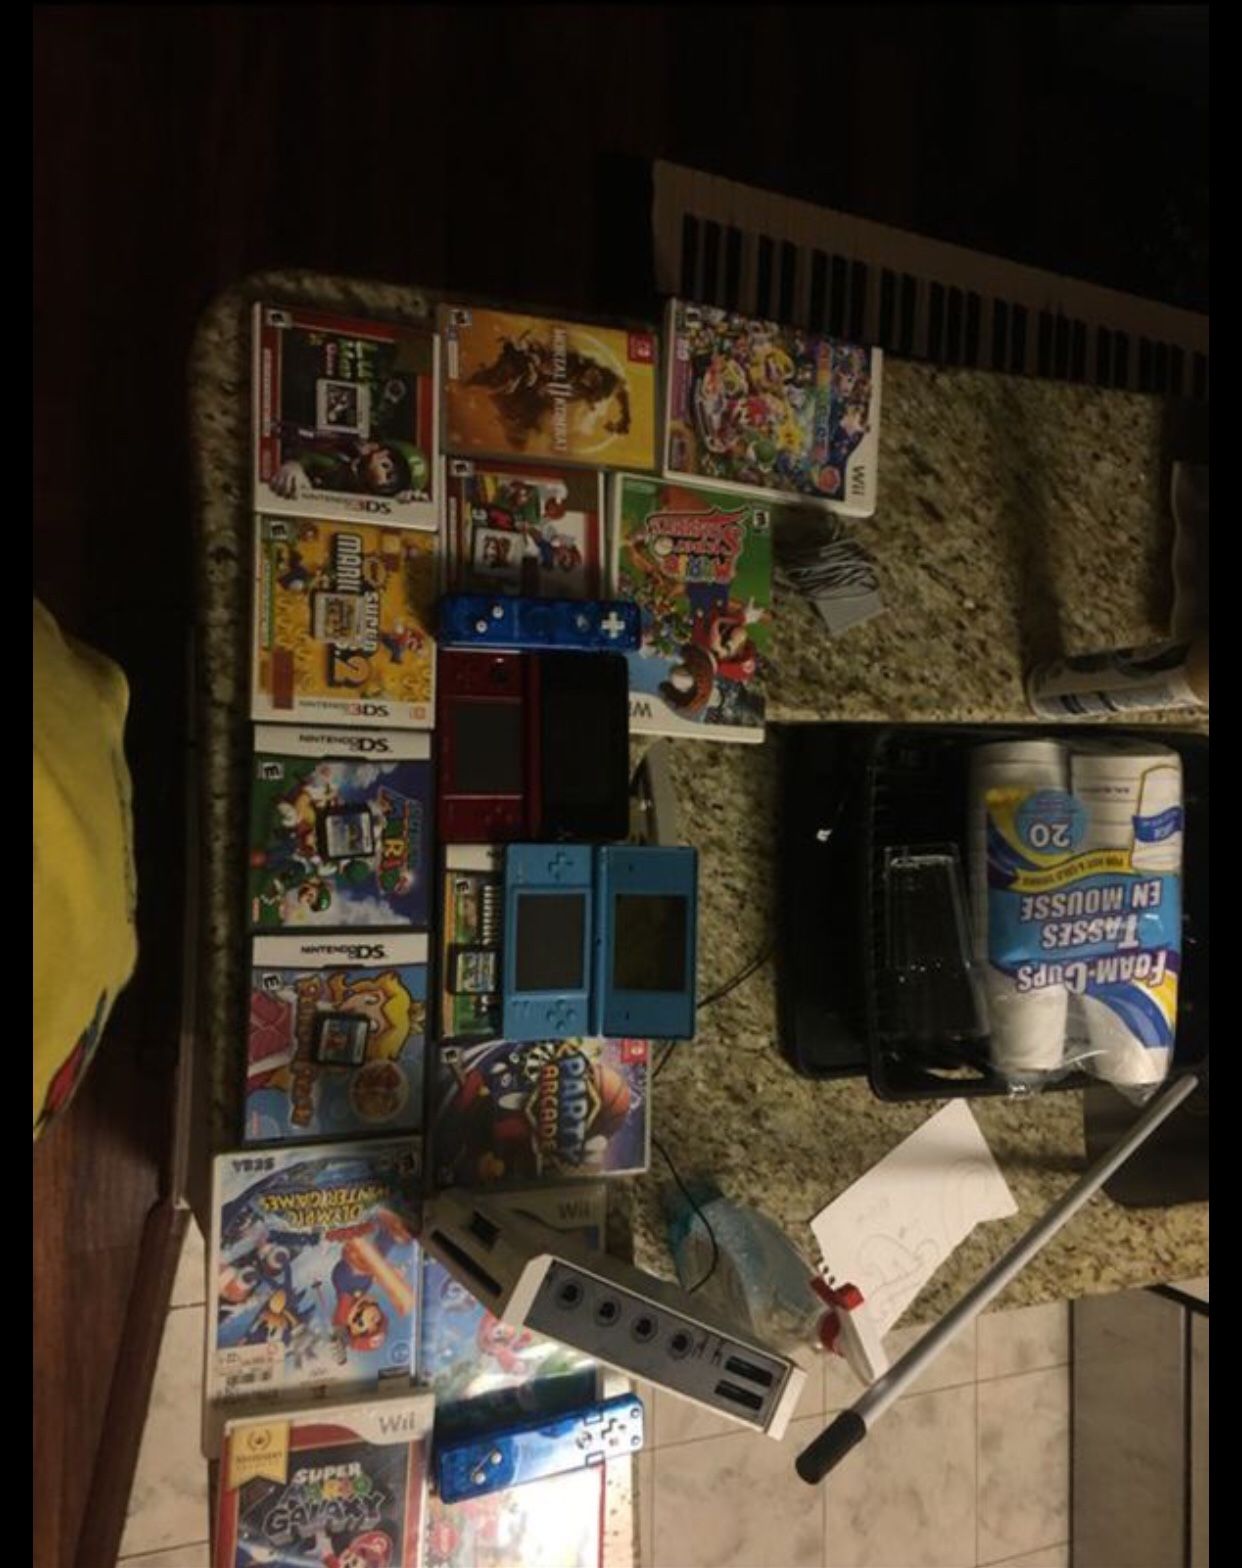 Ds3ds an wii comes with 2 wii controllers 6 wii games an 6 3ds games